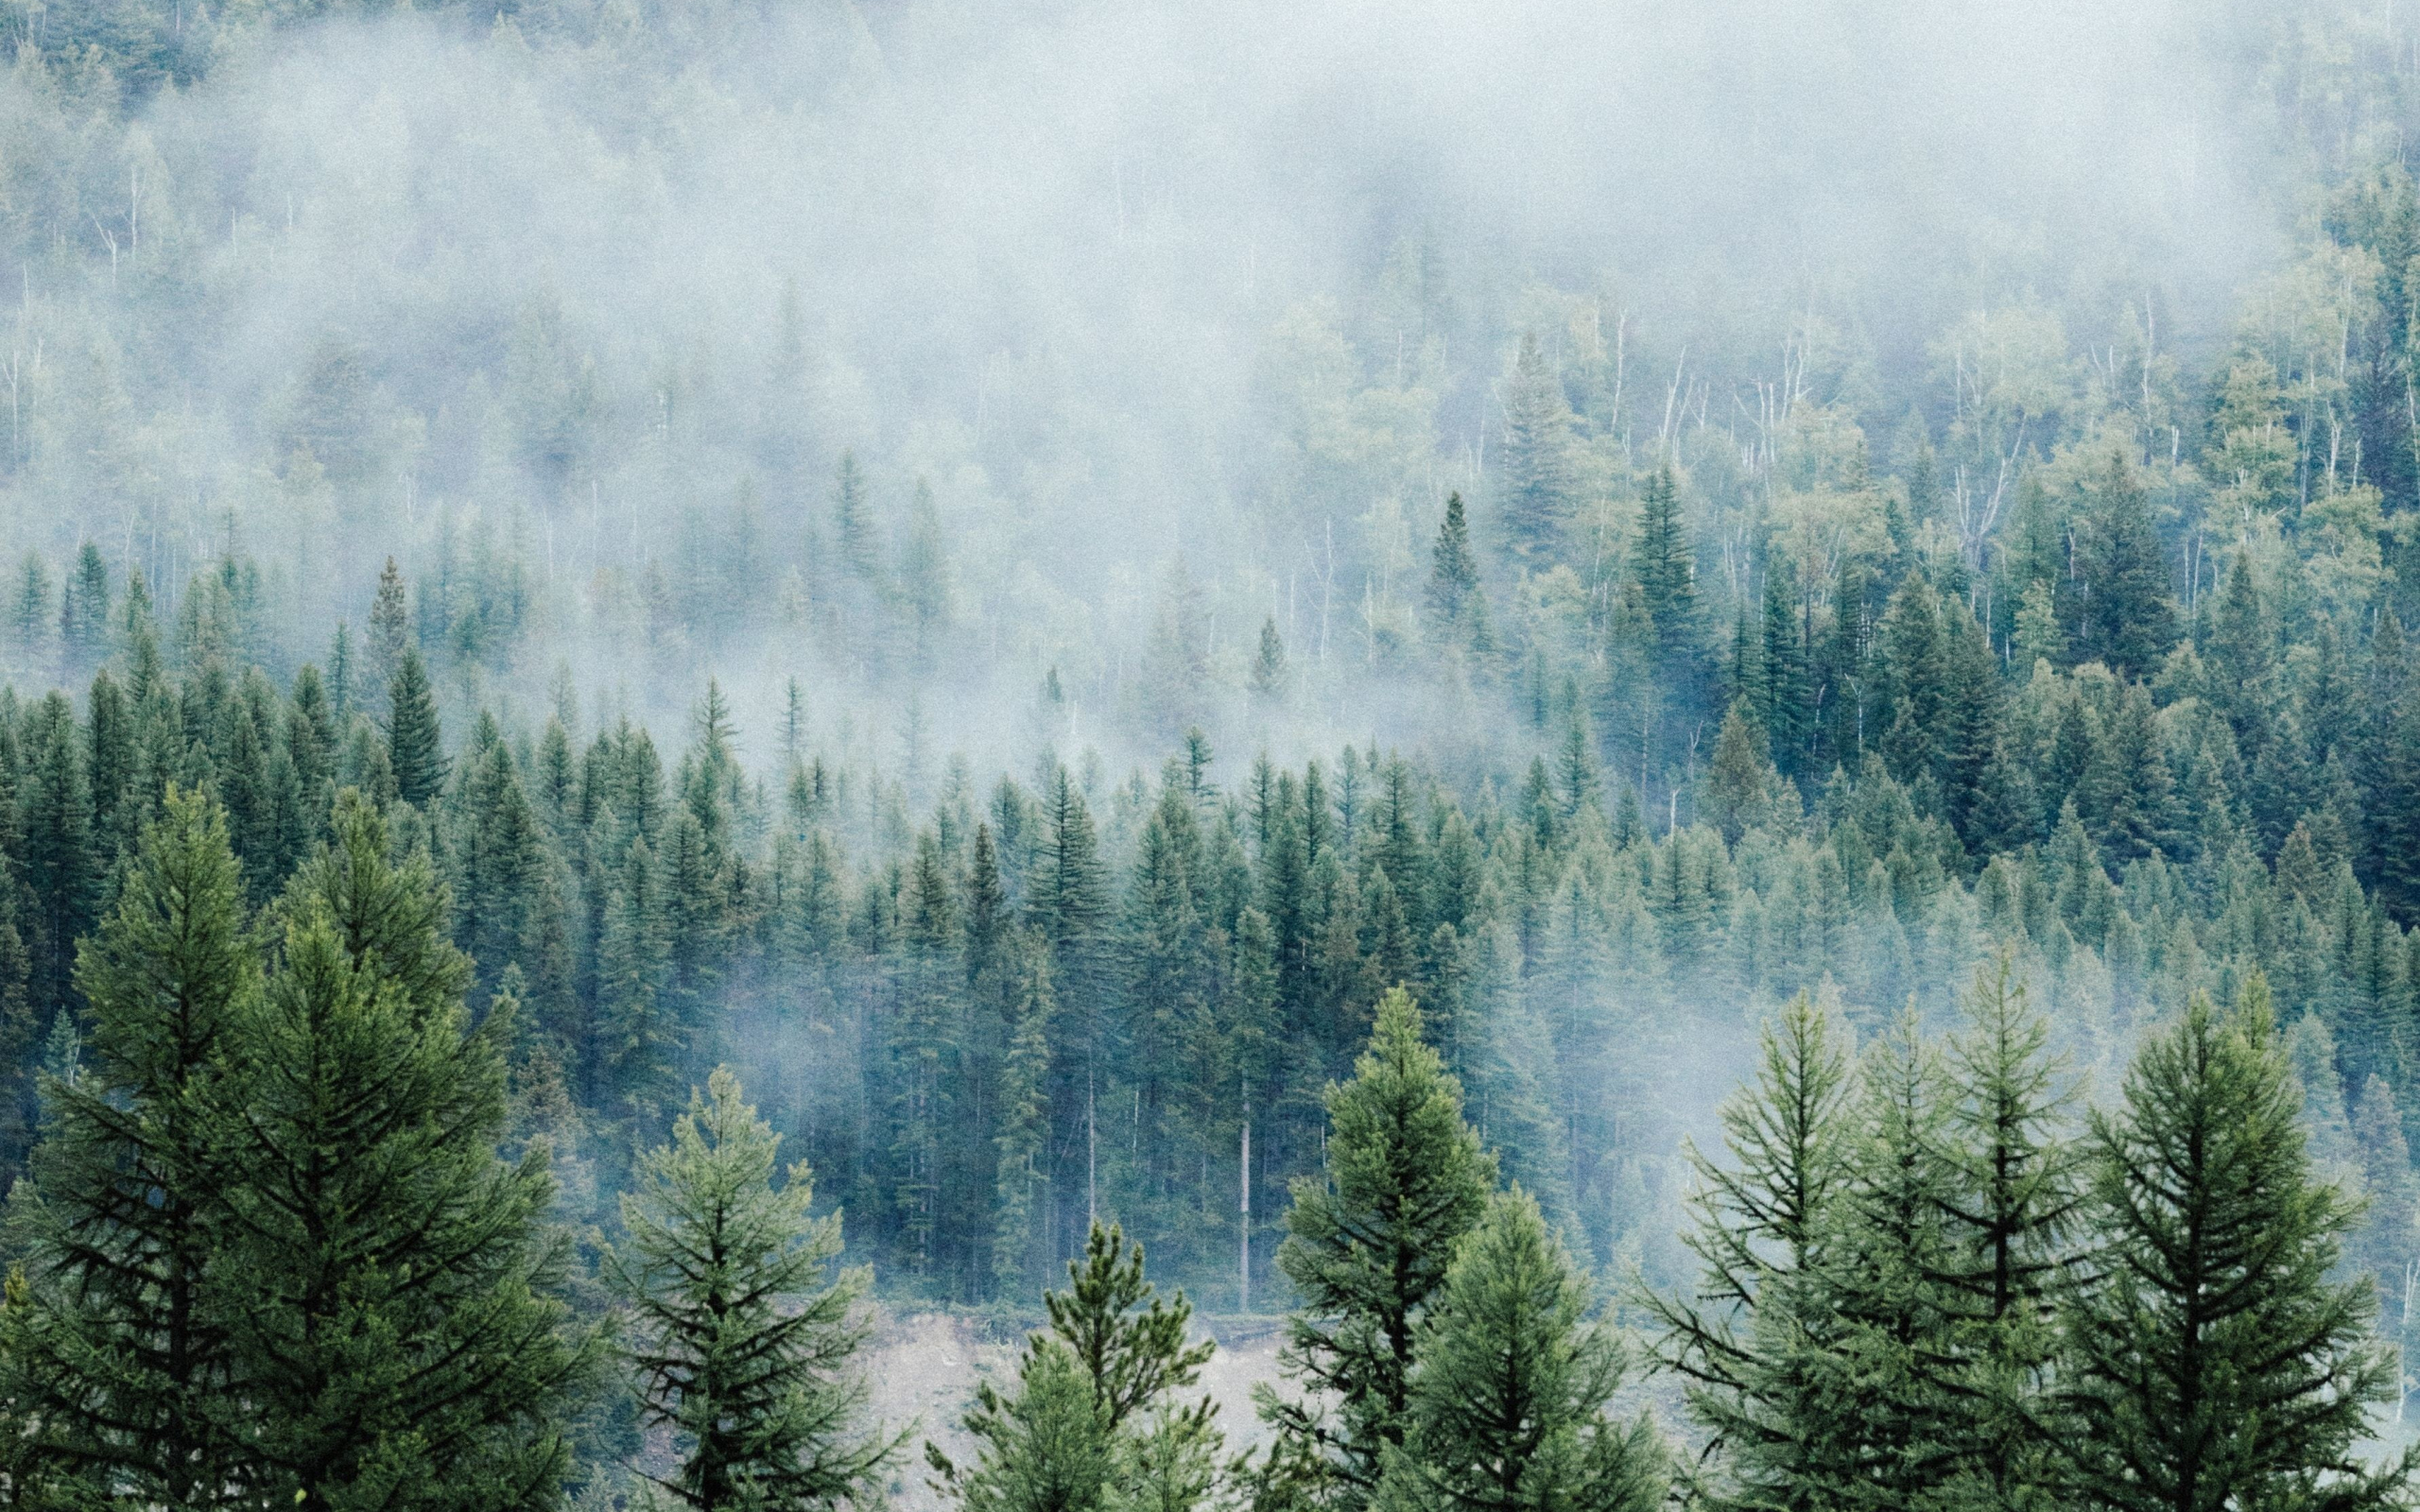 Download wallpaper 2560x1600 forest, fog, tree, nature, montana, dual wide  16:10 2560x1600 hd background, 10400